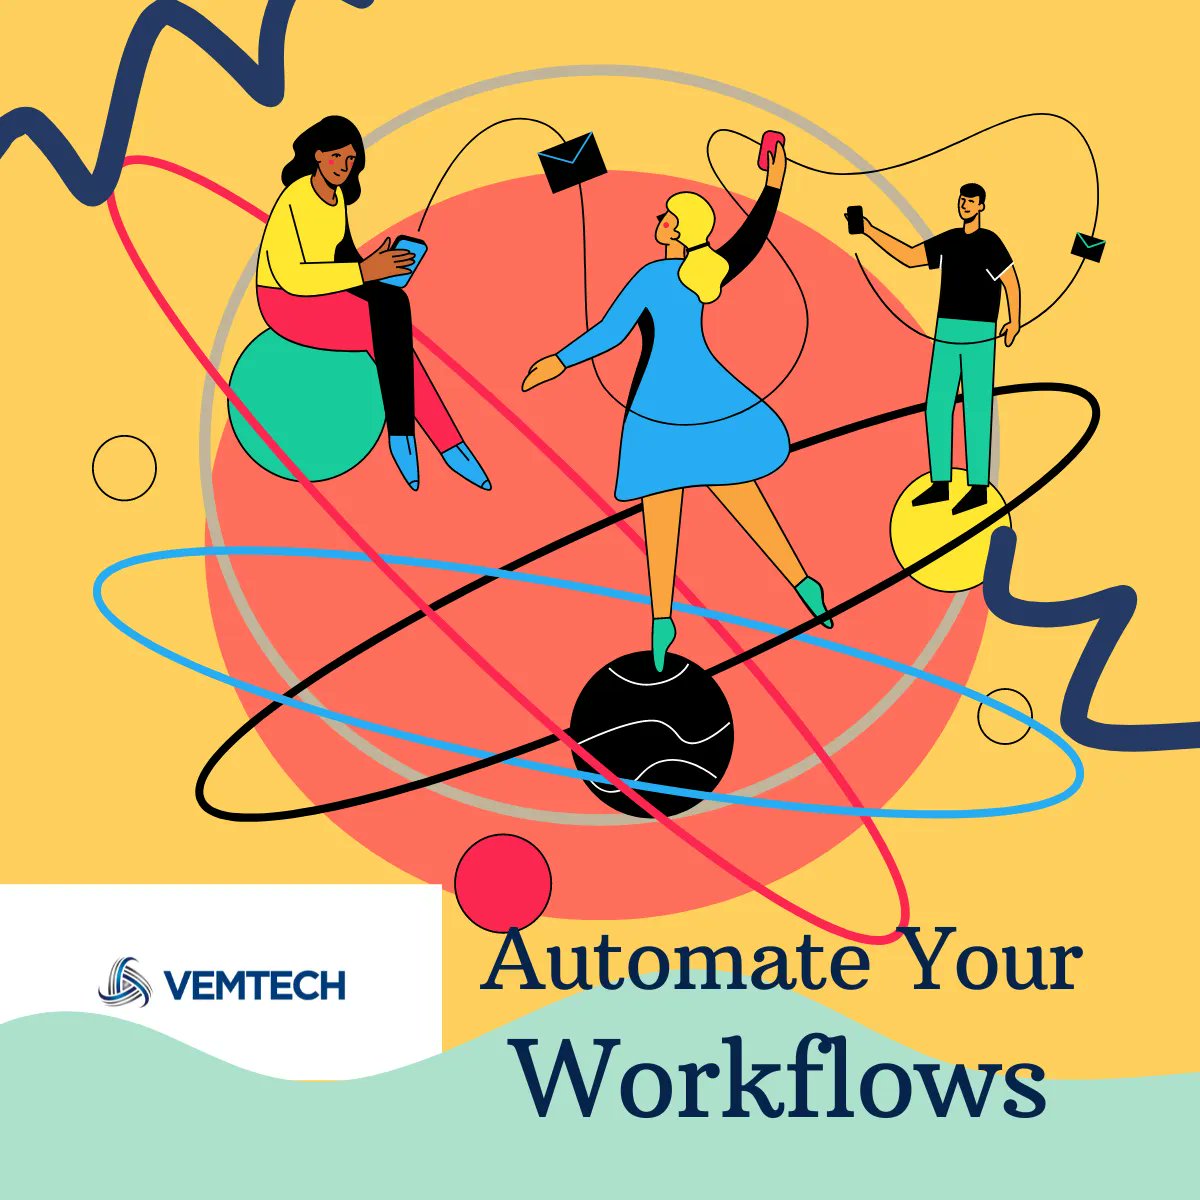 Automate your processes for efficiency. Work smarter, not harder! 🤖 

#AutomationForGrowth #VemTech #MartinsburgWV #BerkeleyCountyWV #jeffersoncountywv #hagerstownmd #frederickmd #loudouncountyva #winchesterva